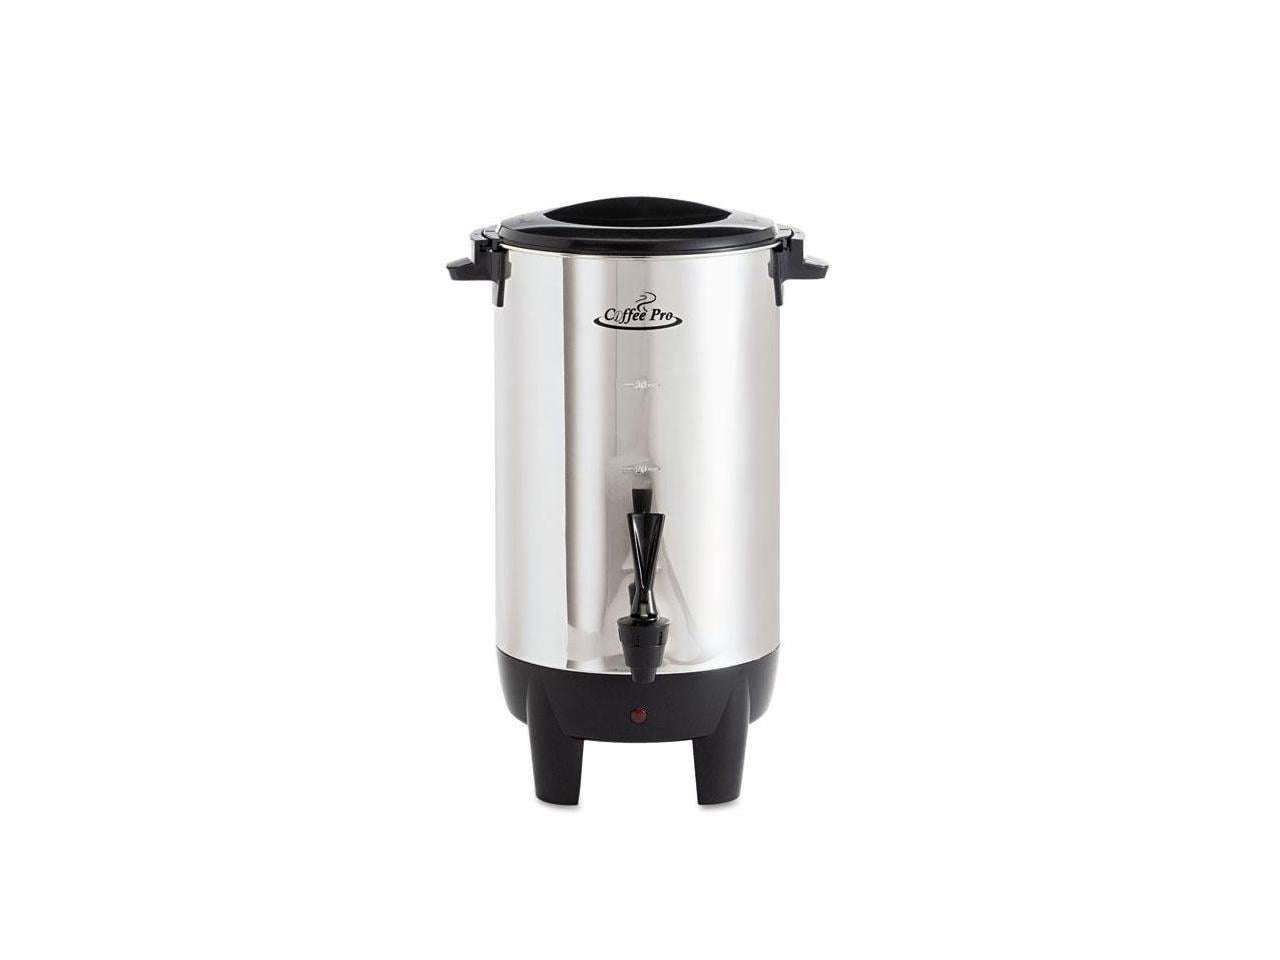 Large coffee maker 30-100 cup, Black and Stainless Coffee Urn